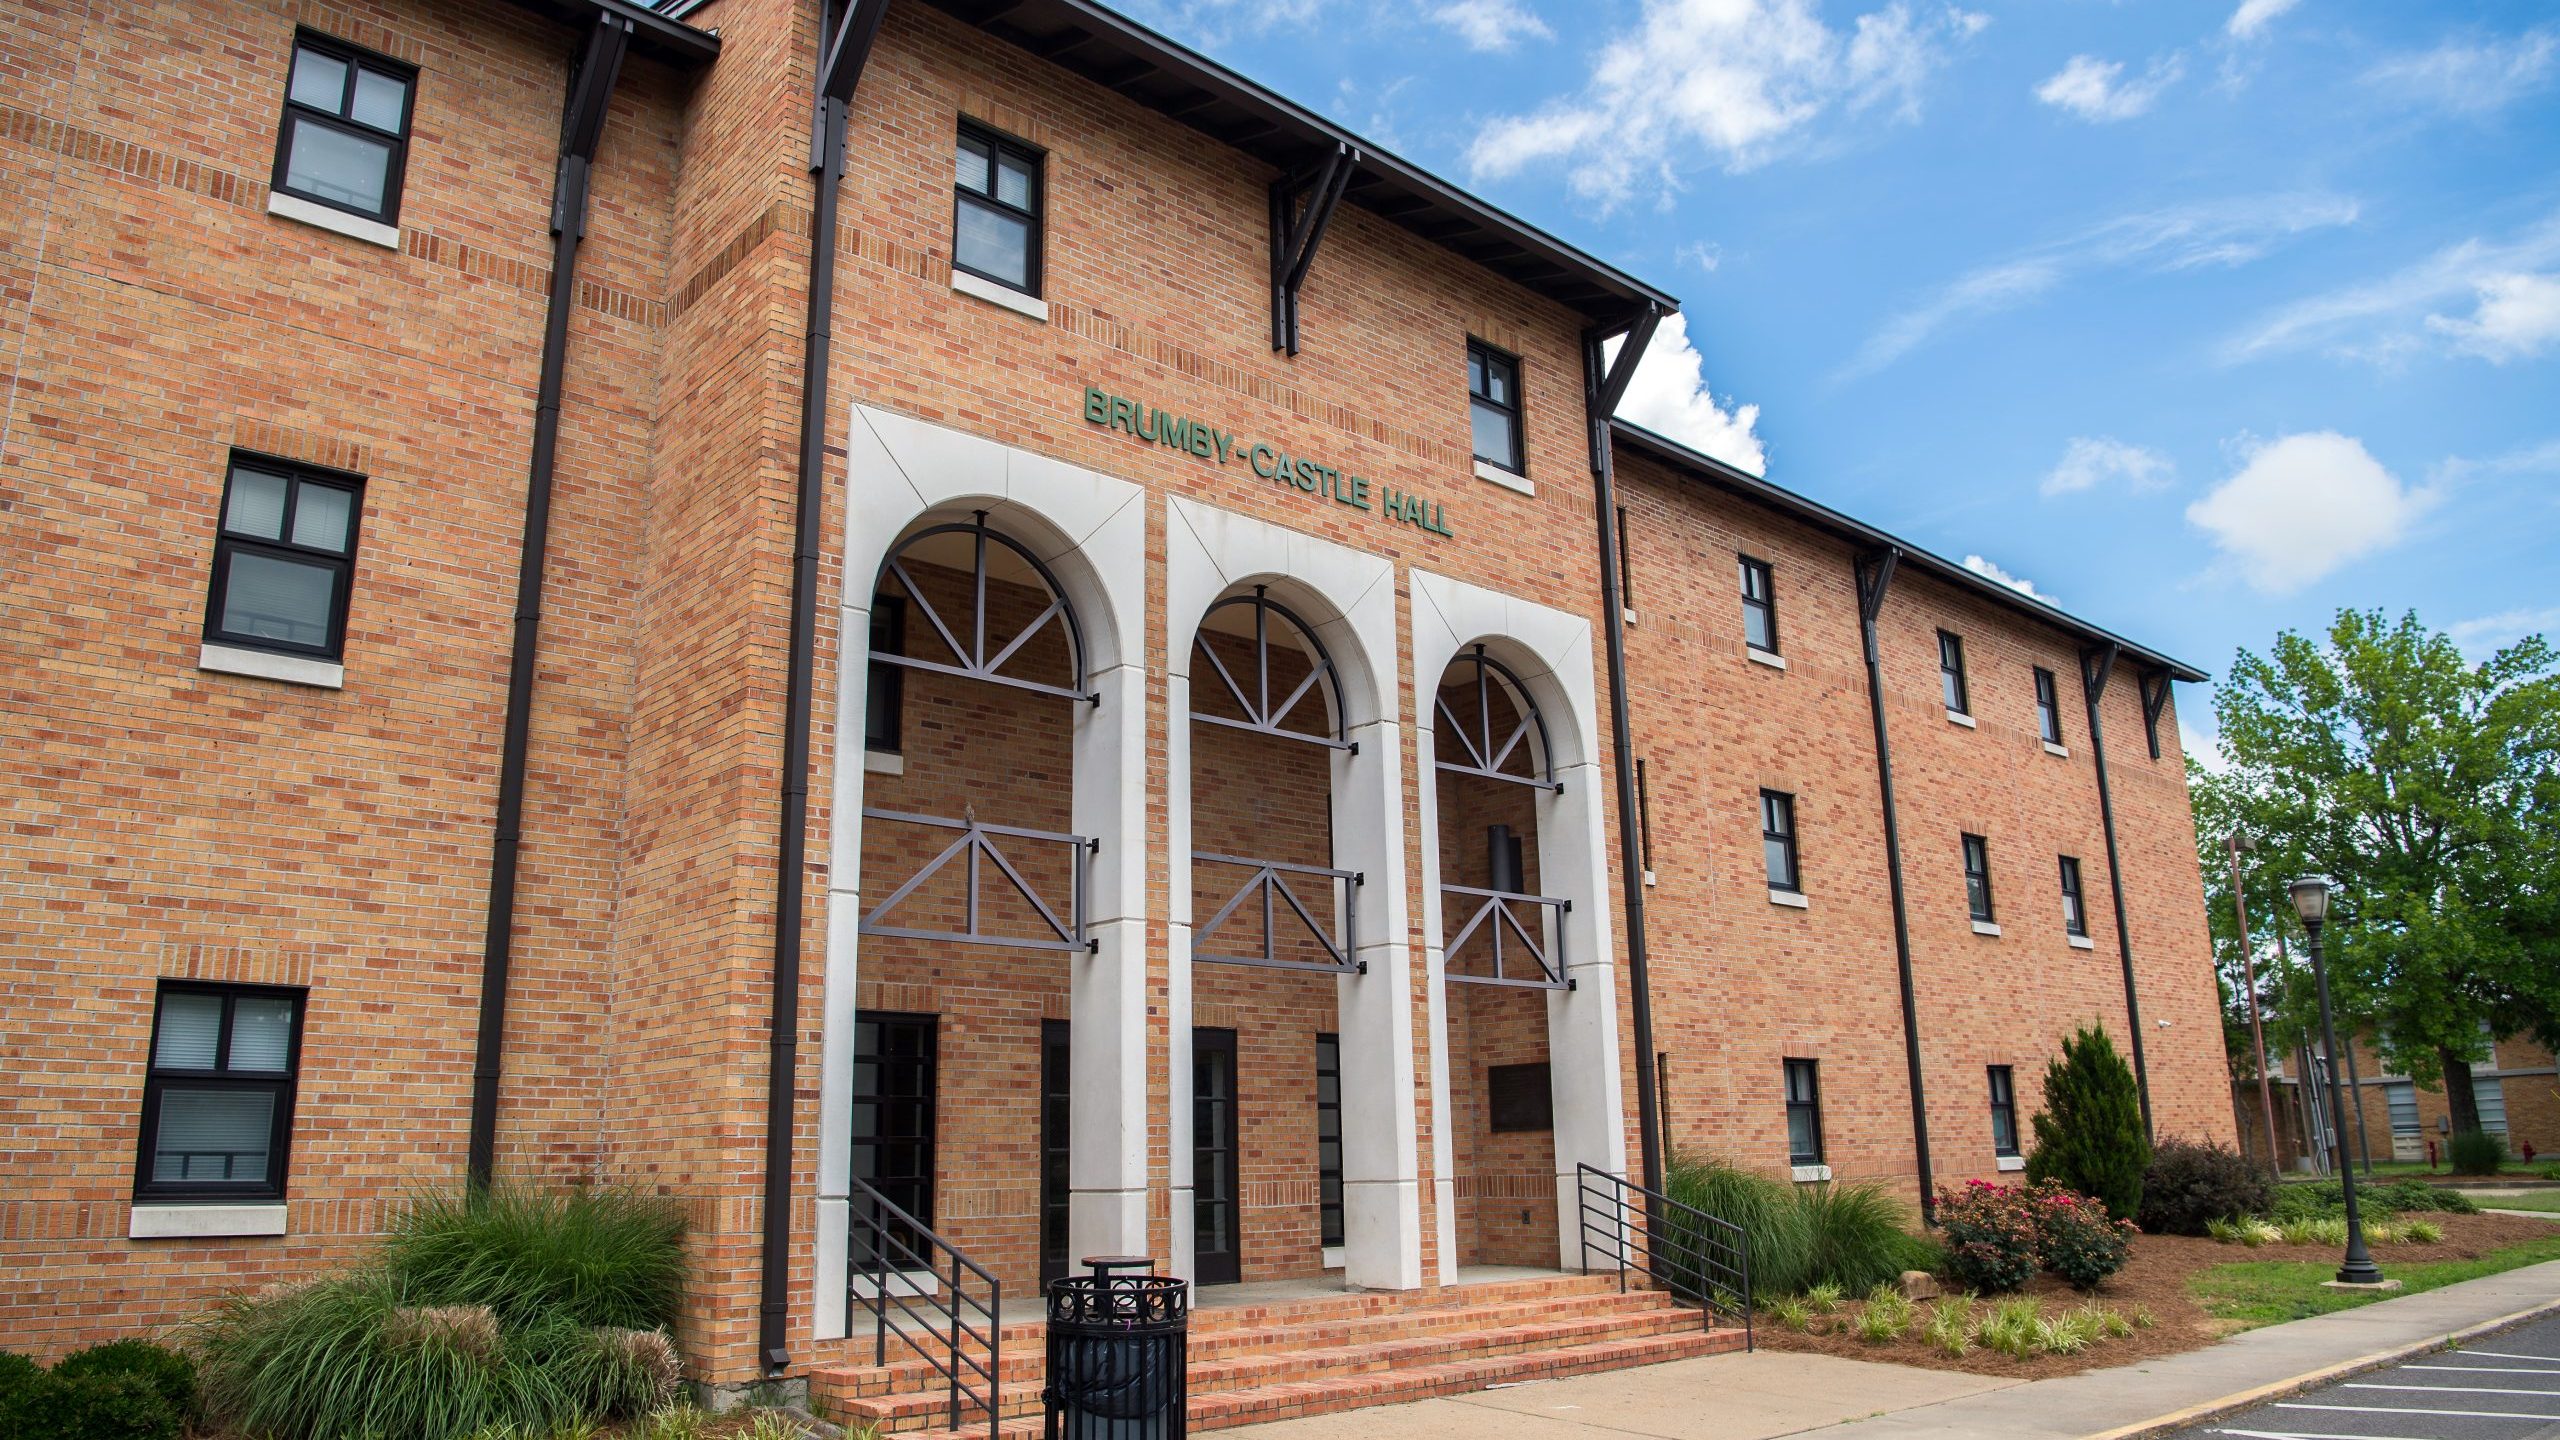 Exterior view of Brumby-Castle residence hall.